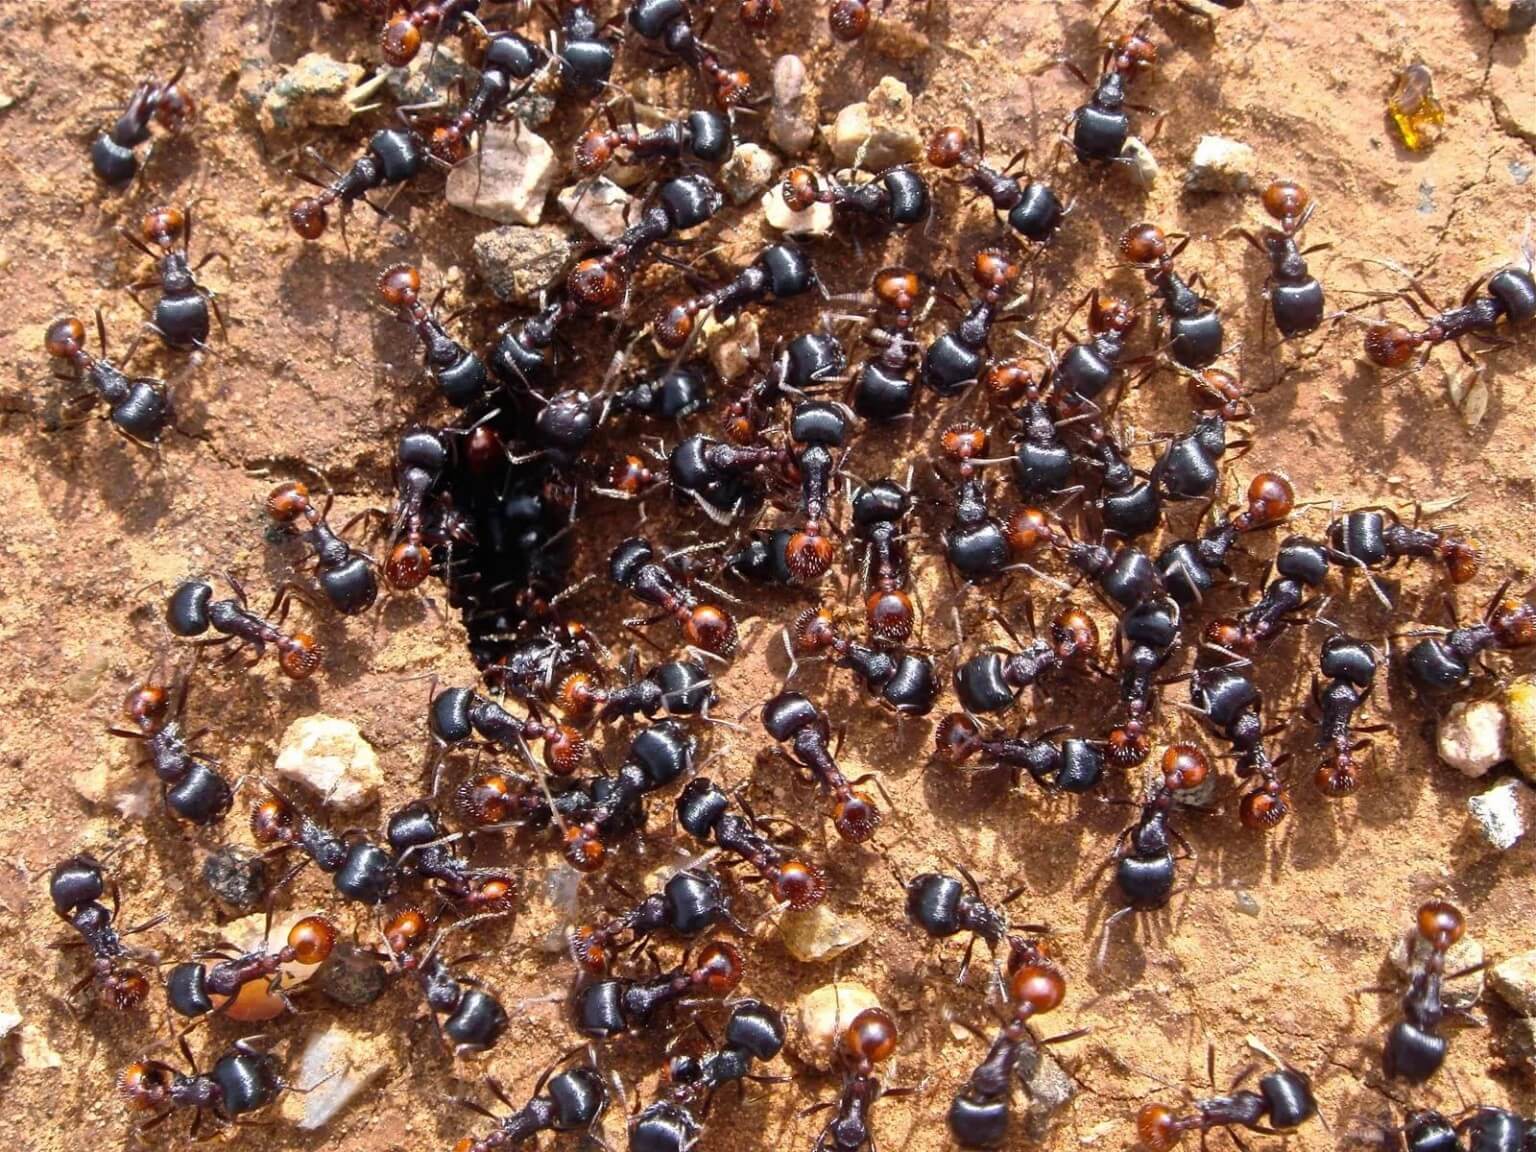 Every Ant Colony Has Its Own Smell